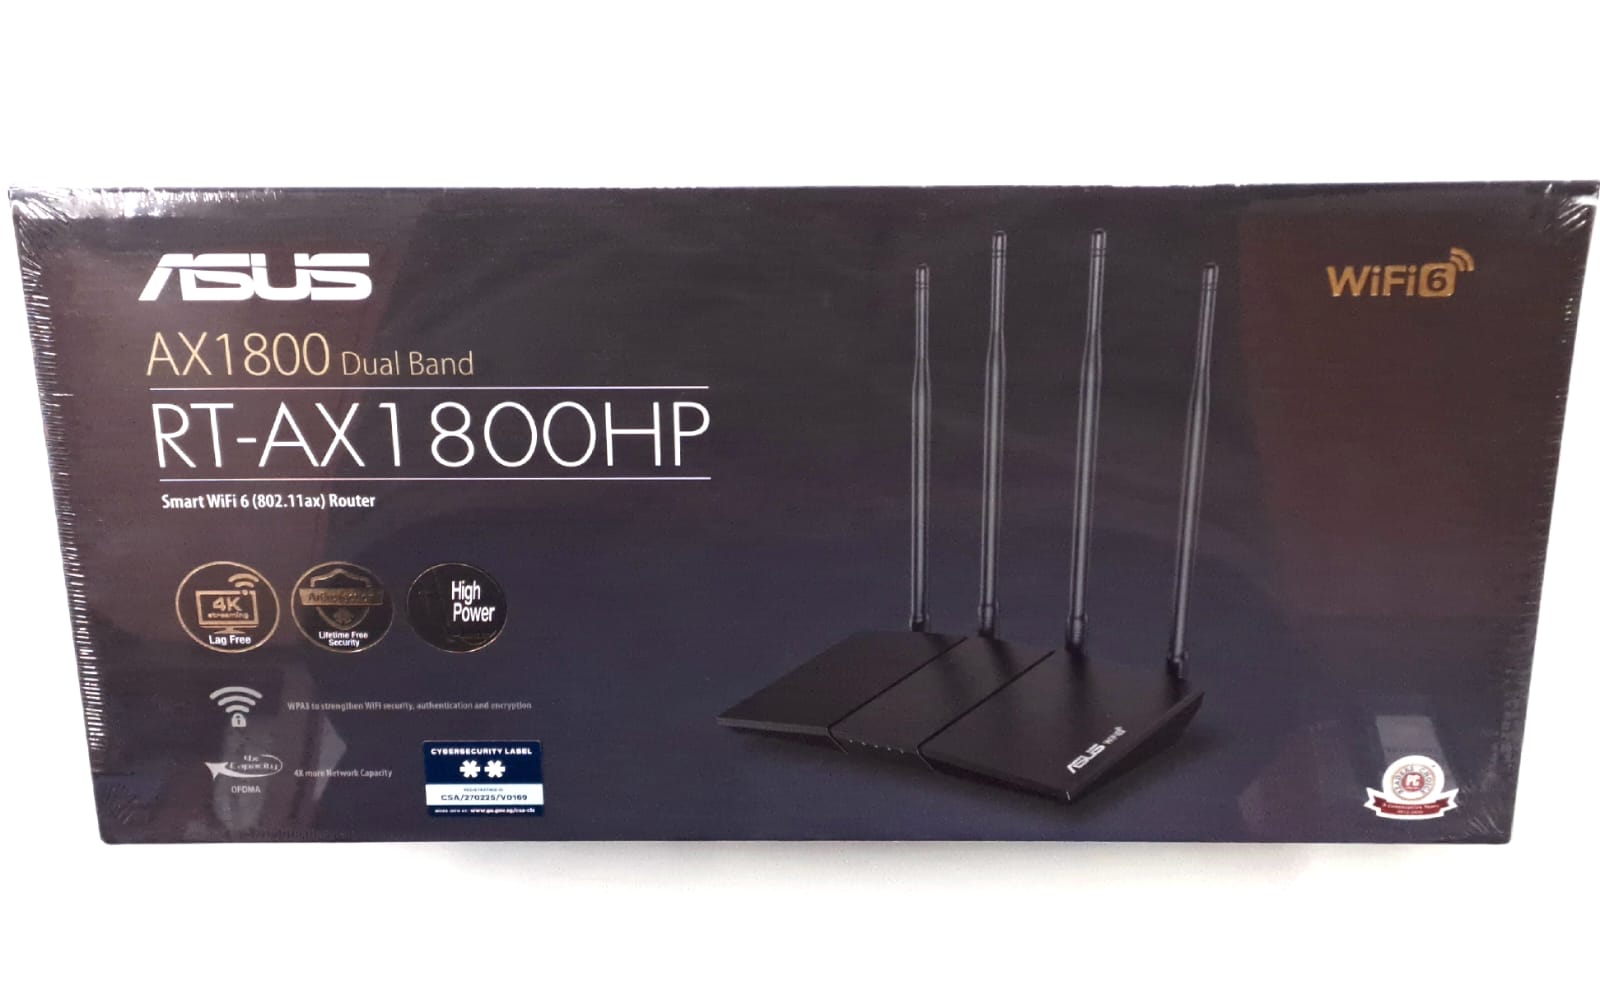 ASUS AX1800 Dual Band Smart WiFi 6 Router